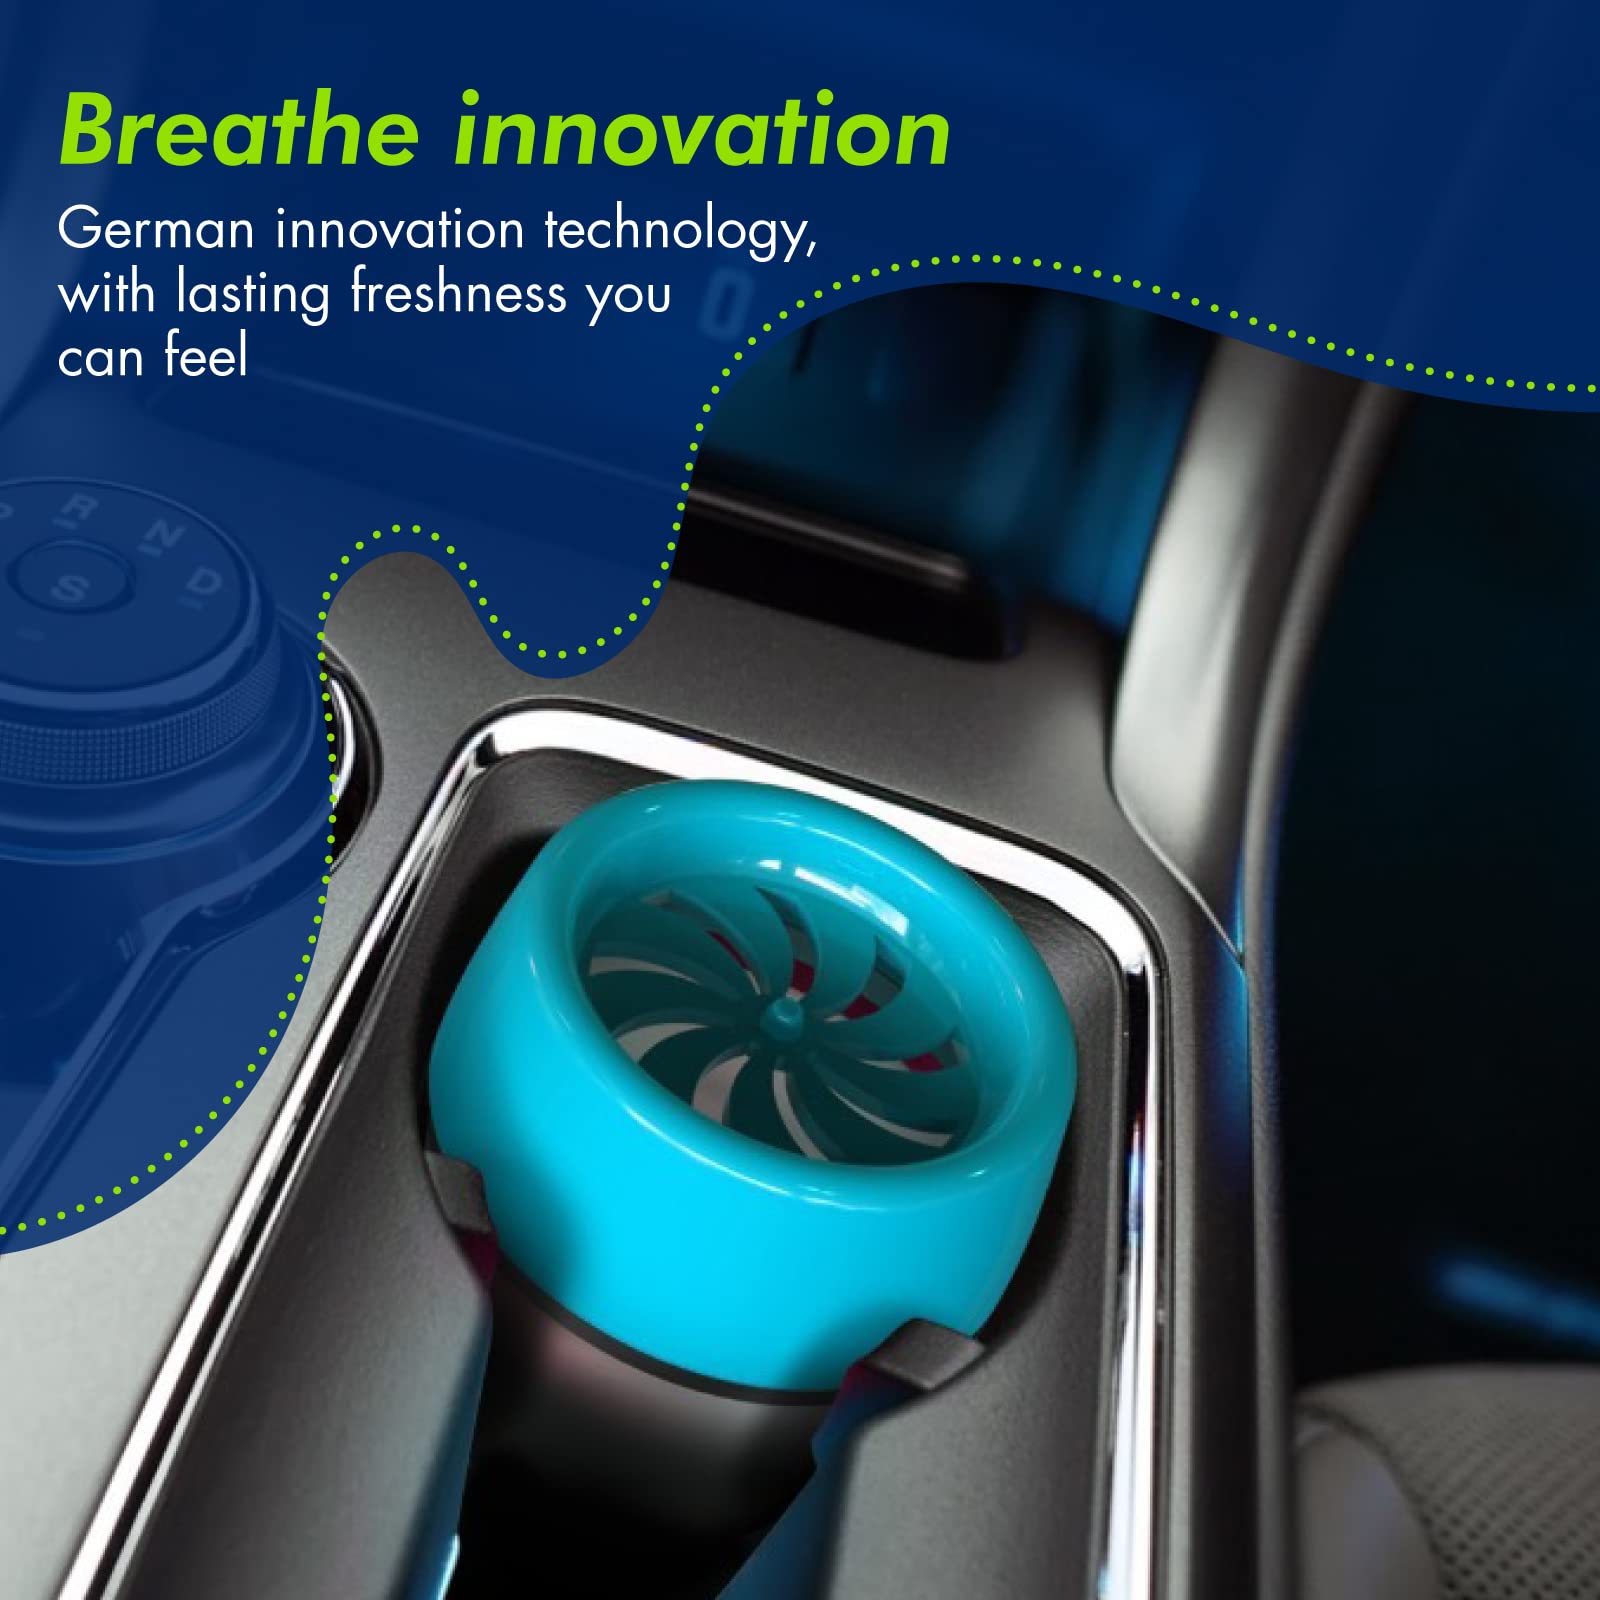 Absorbia Aviator Car Gel Air Freshener -Pack of 12(125g X 12) with fragrance of Blue Wave & Tropical Joy |with intensity regulator for stronger or lighter fragrance|Water based,low VOC and pDCB free…